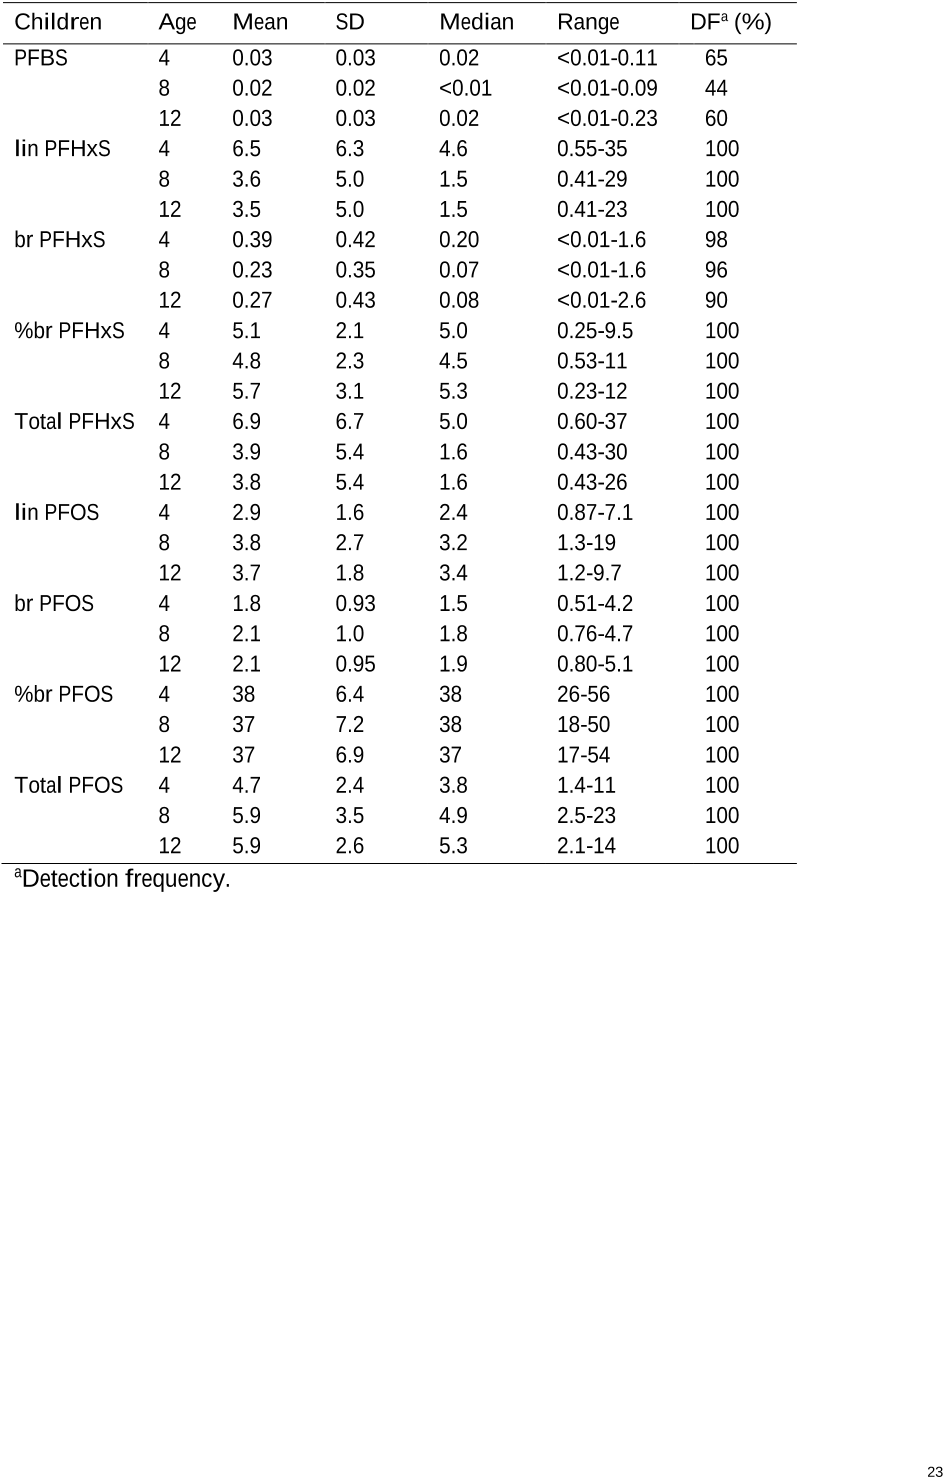 Table 3. Perfluoroalkane sulfonic acid (PFSA) serum concentrations in children at 4 (n=57), 8 (n=55), and 12 (n=119) years of age (ng g-1 serum)